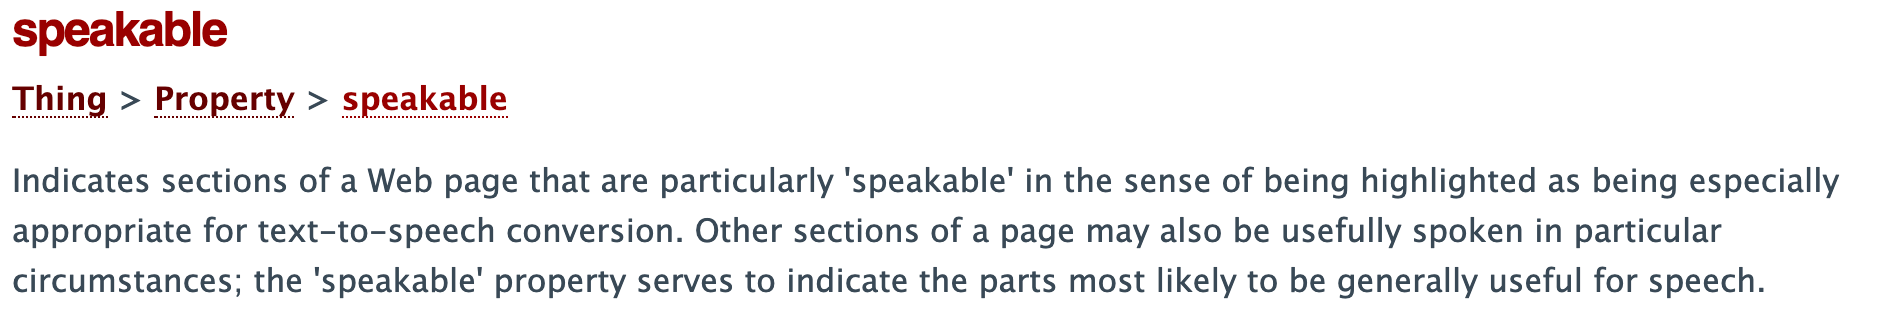 schema definition for speakable tag